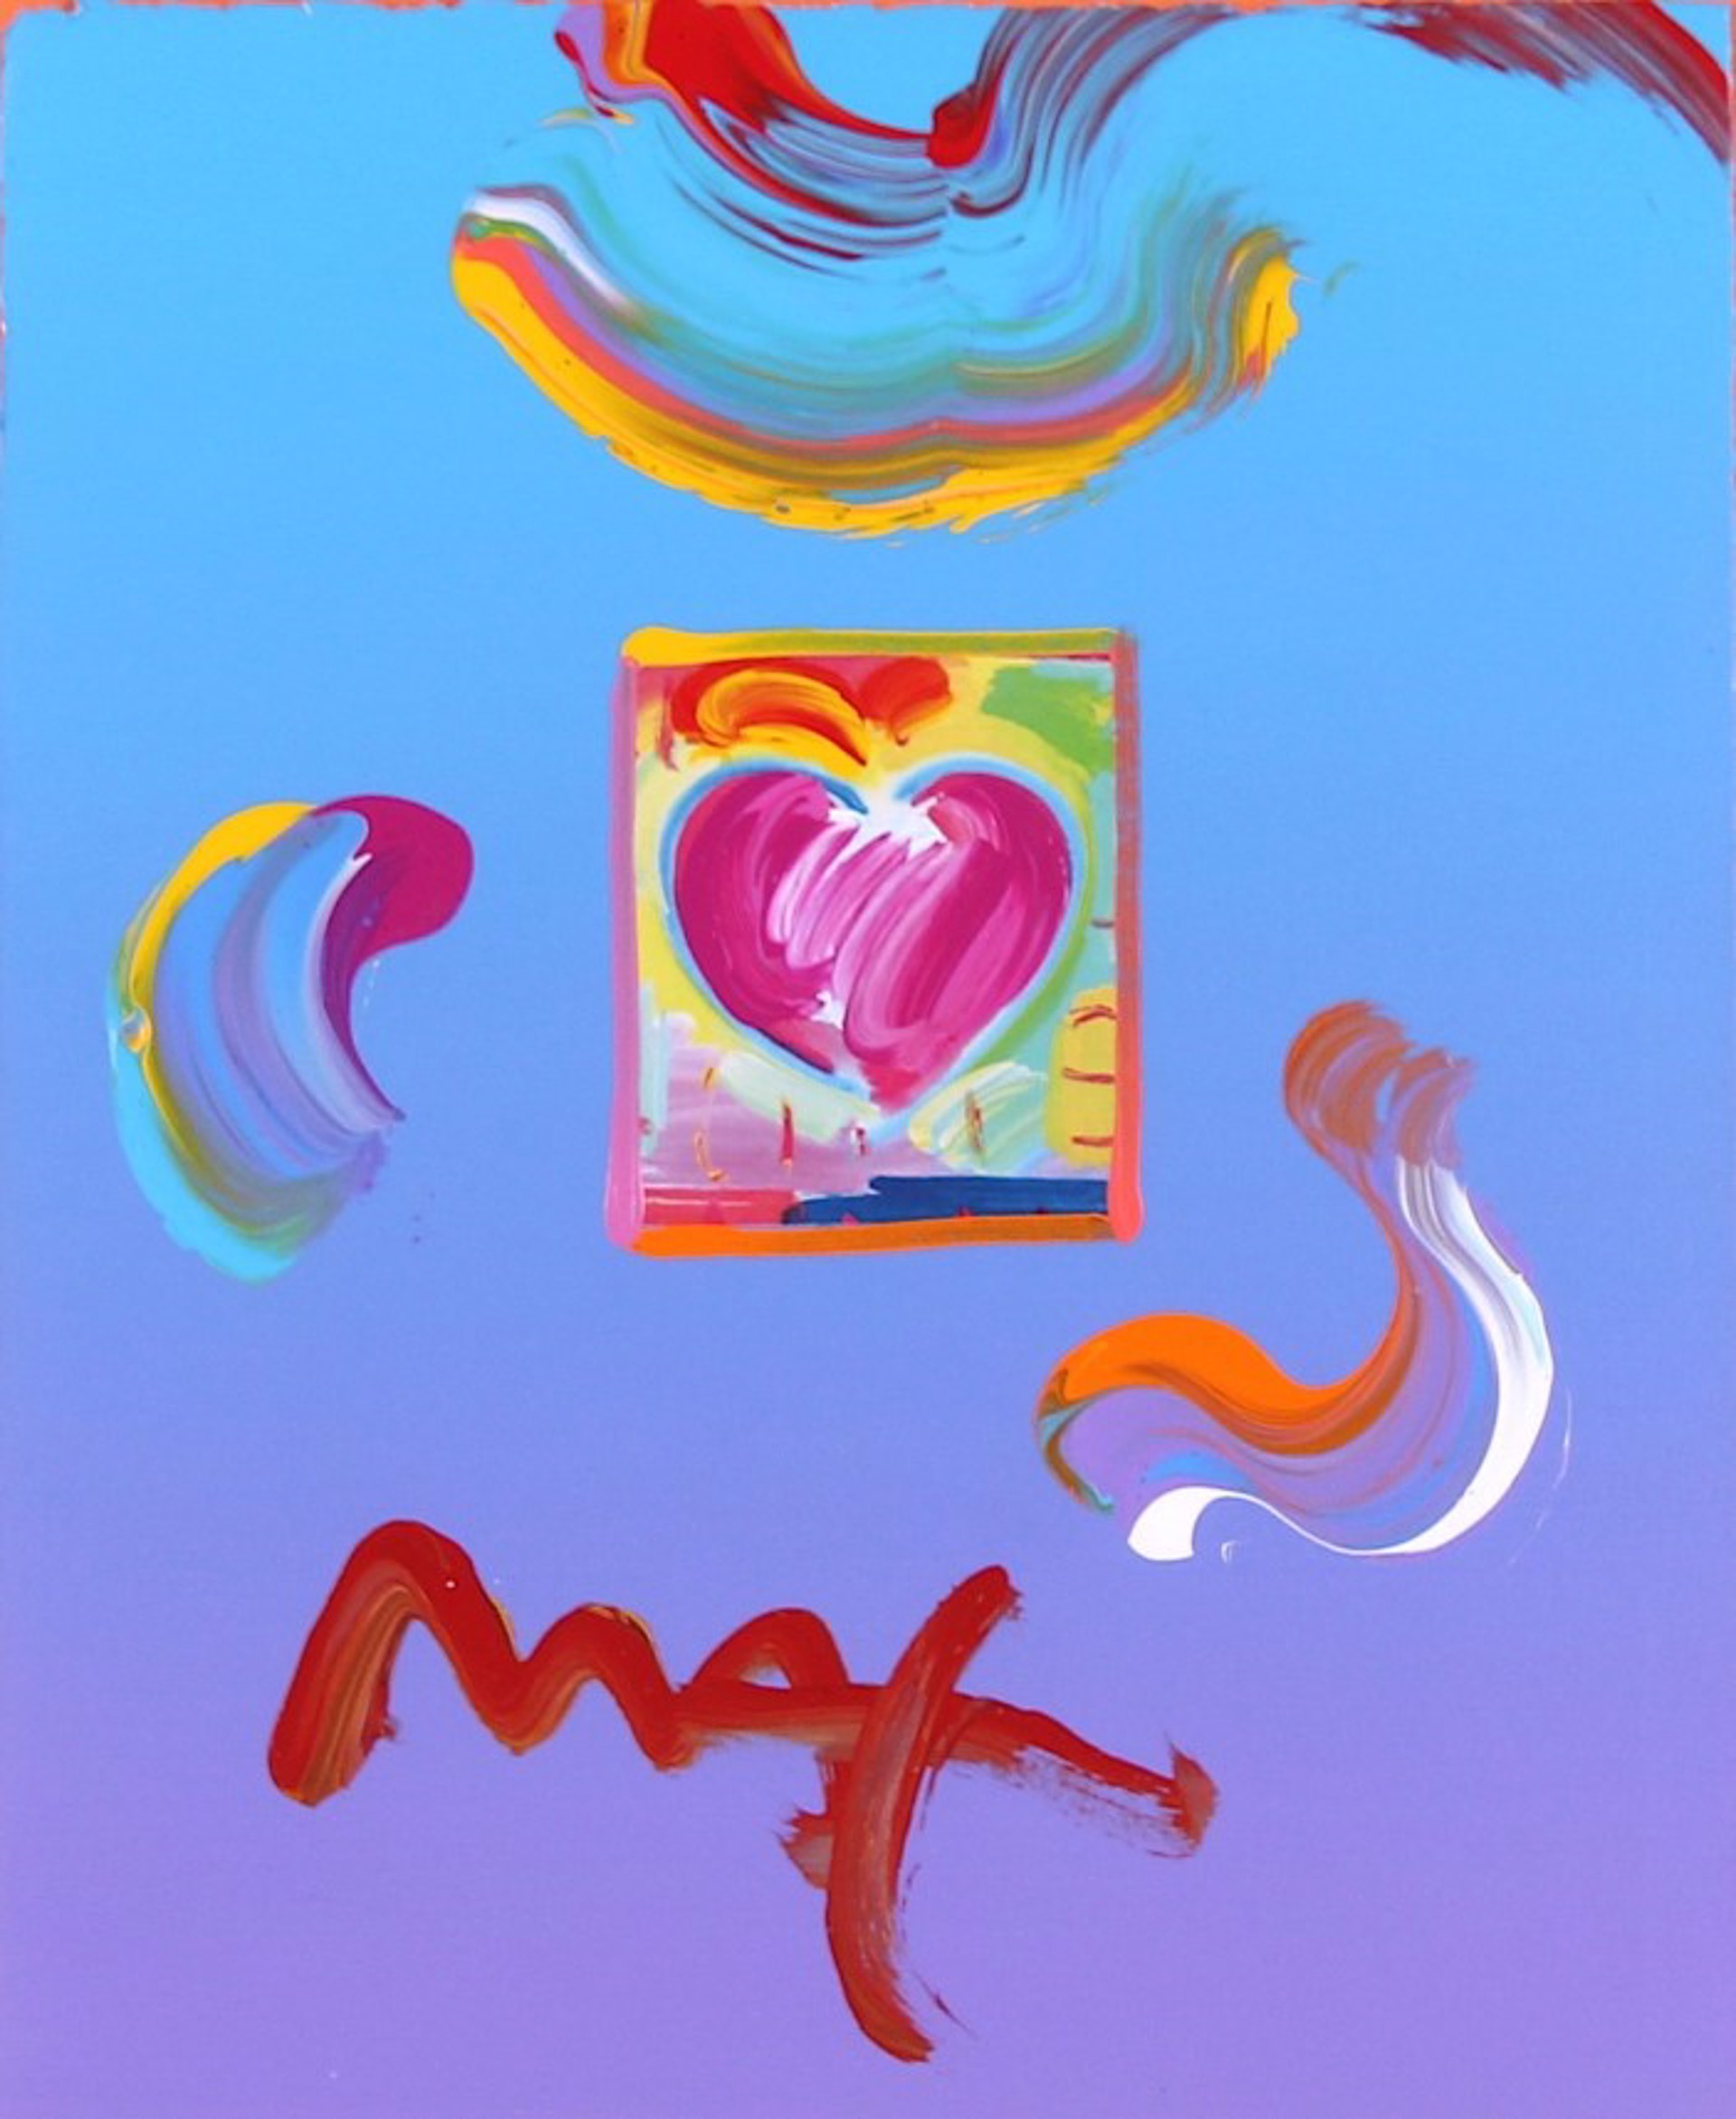 Heart Series by Peter Max